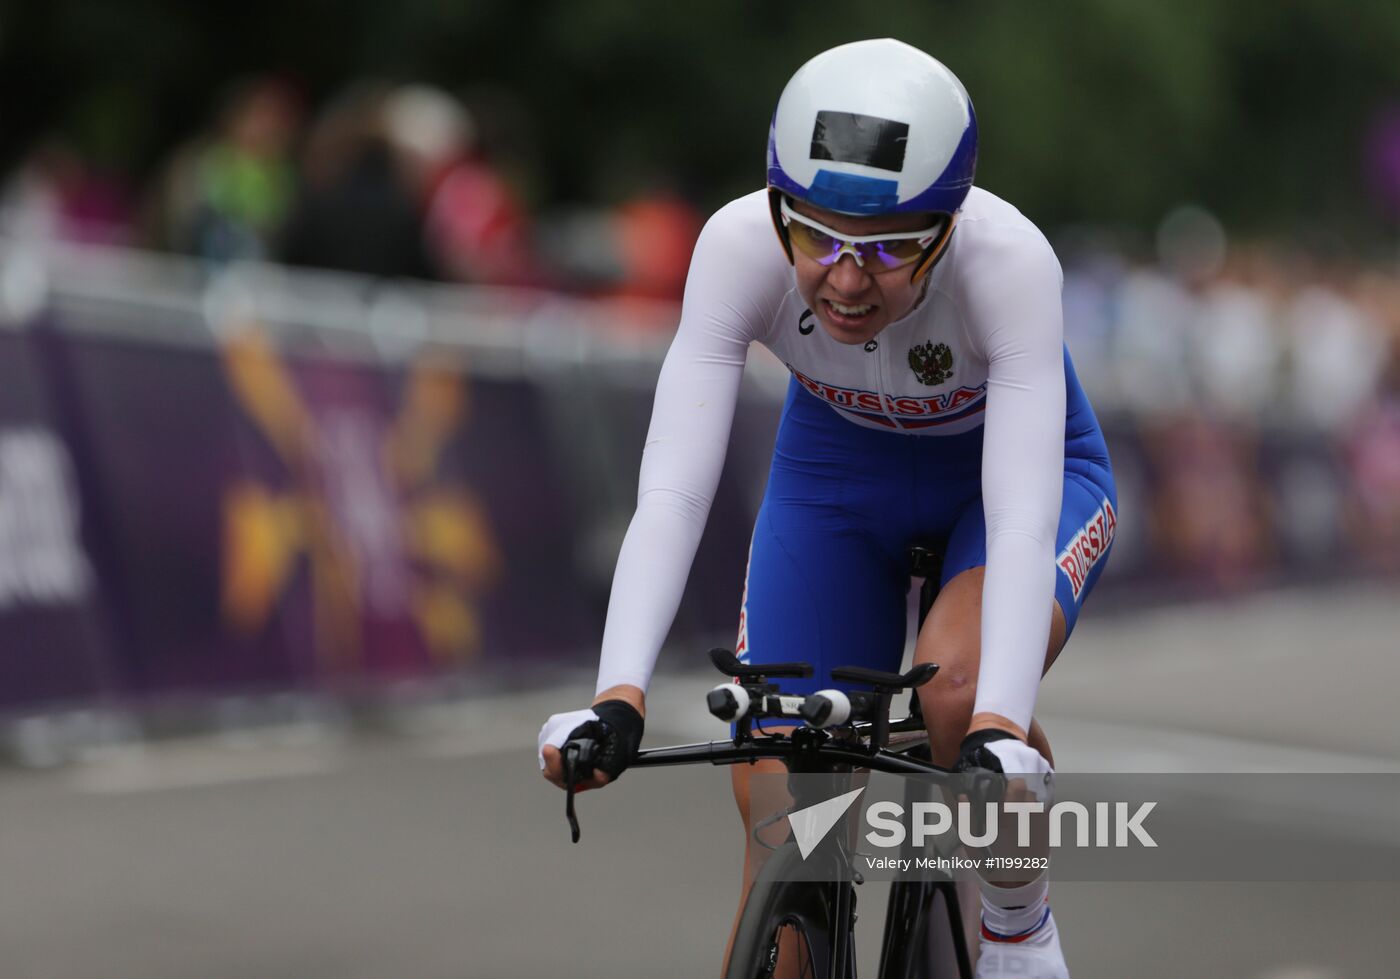 2012 Olympic Games.Cycling - Road.Women's Individual Time Trial